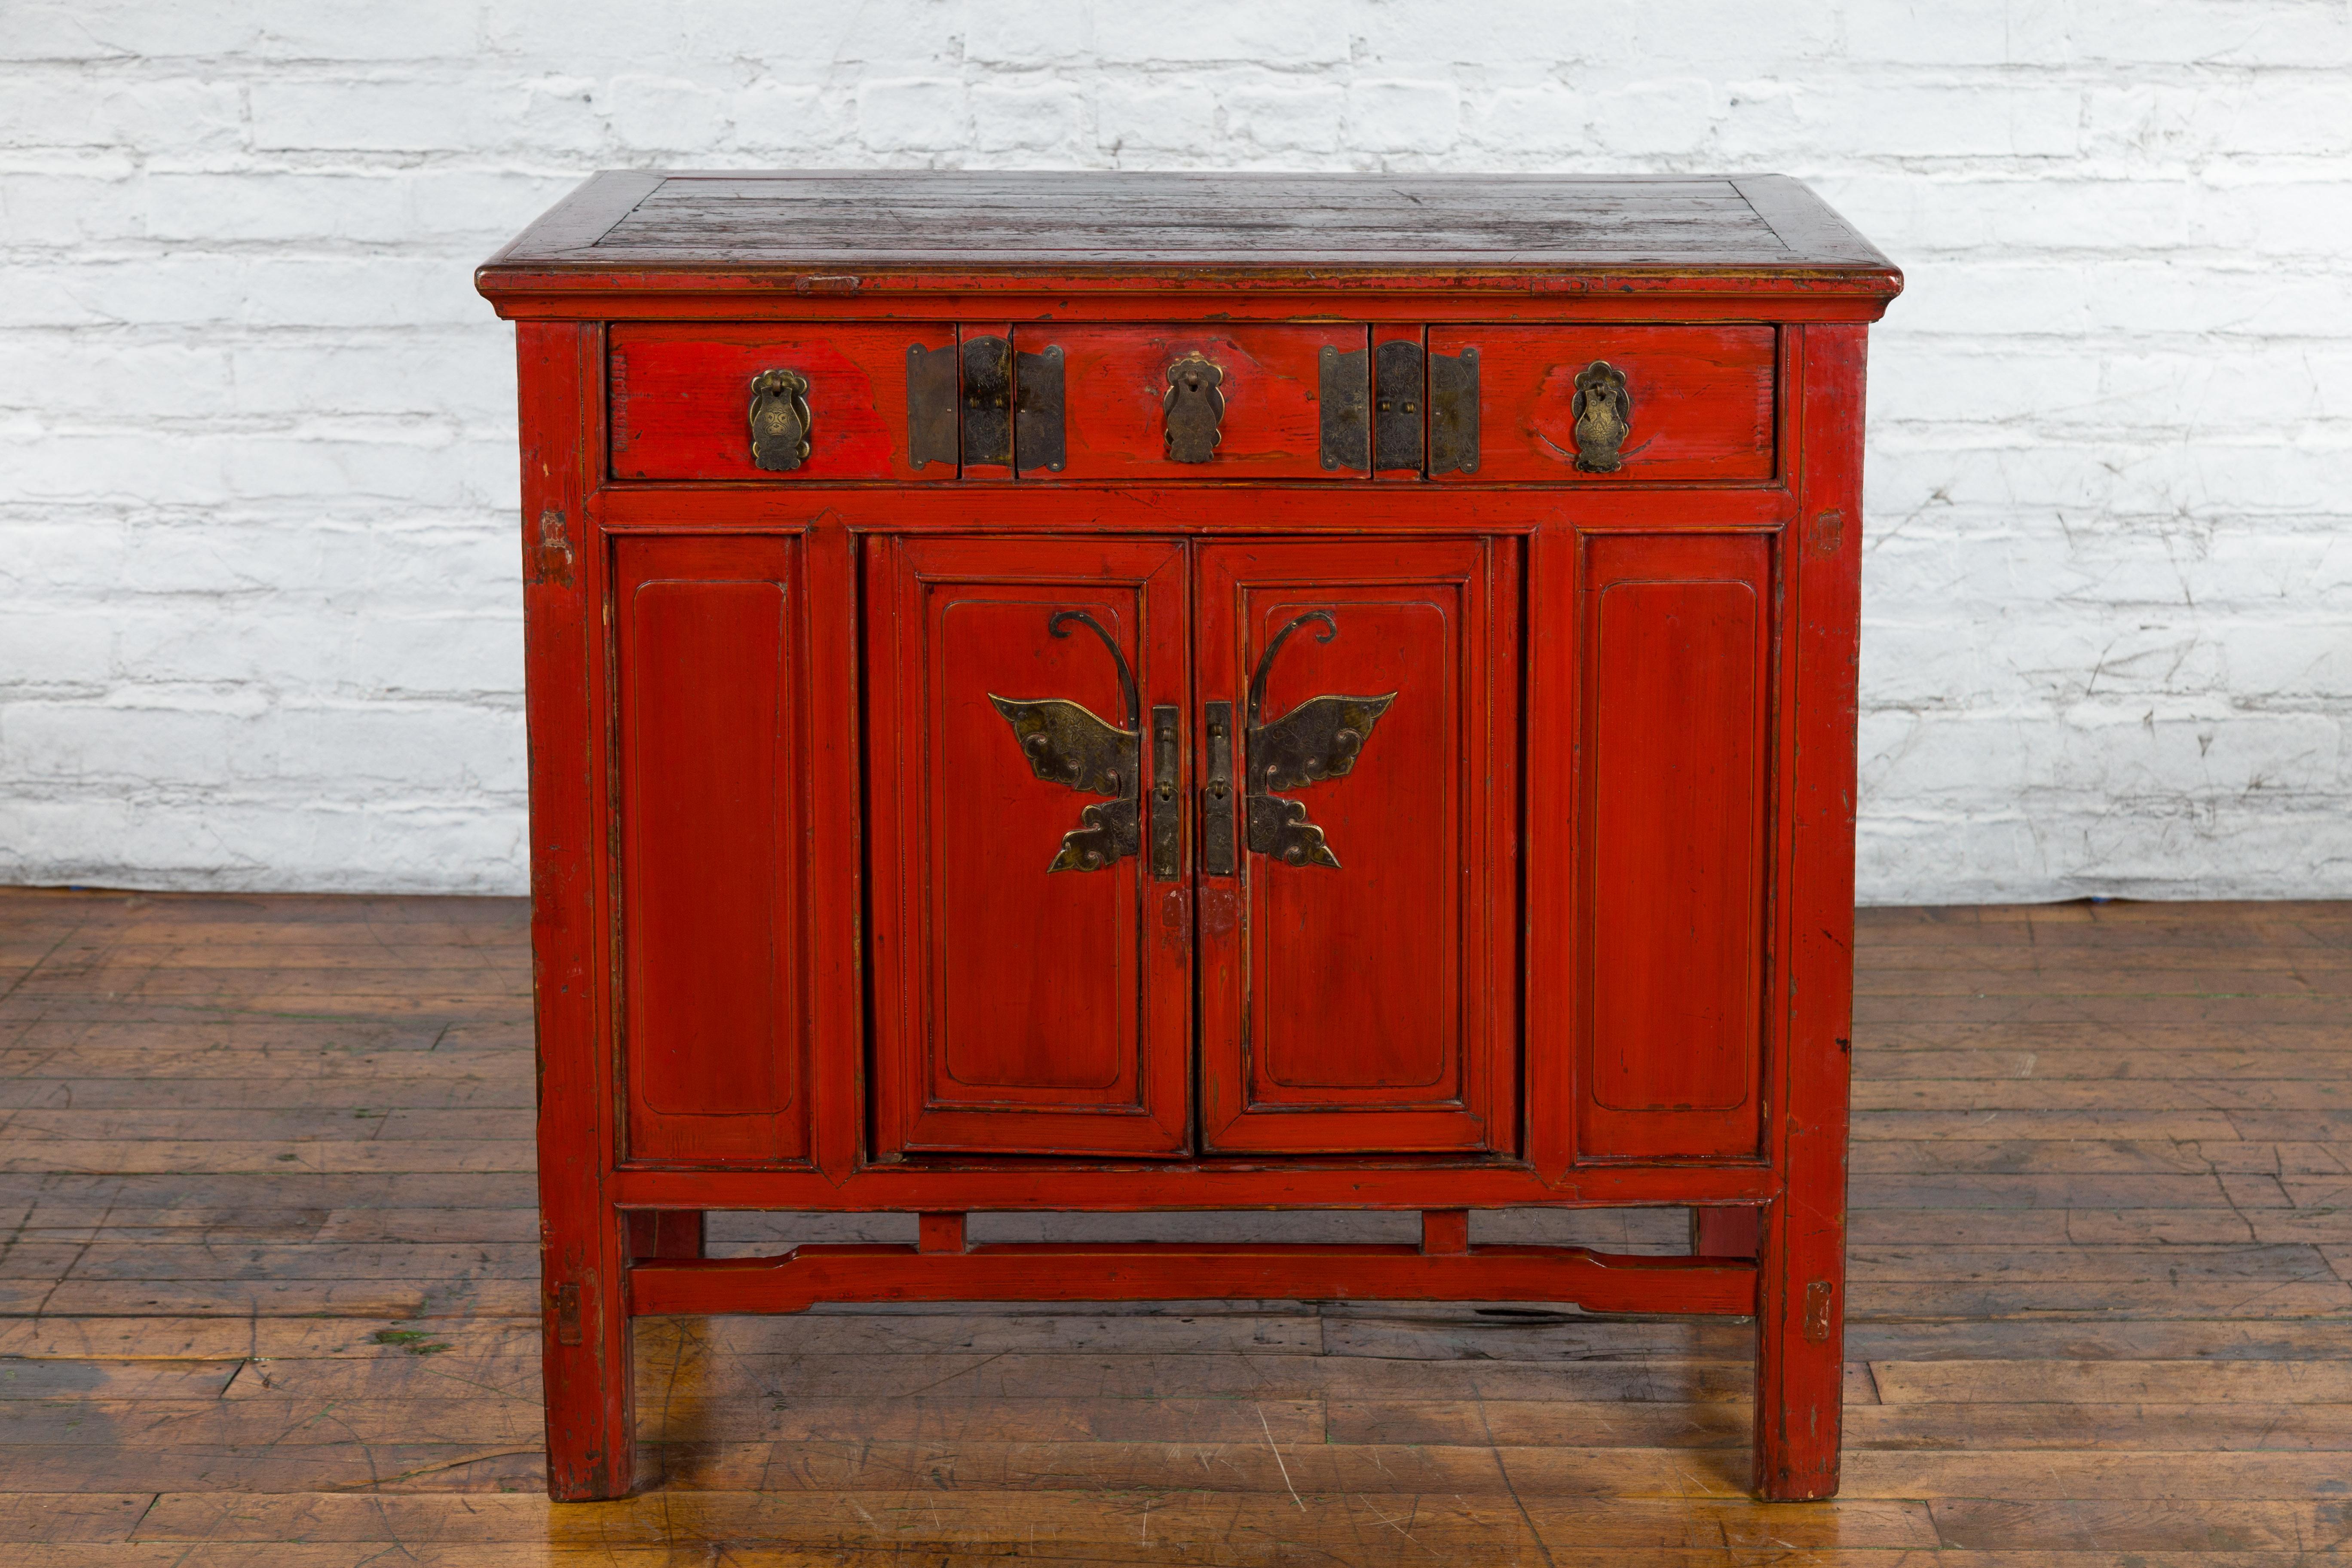 A Chinese Qing Dynasty period cabinet from the 19th century with red lacquer, butterfly bronze hardware, three drawers over two small doors. Created in China during the Qing Dynasty in the 19th century, this cabinet captures our attention with its